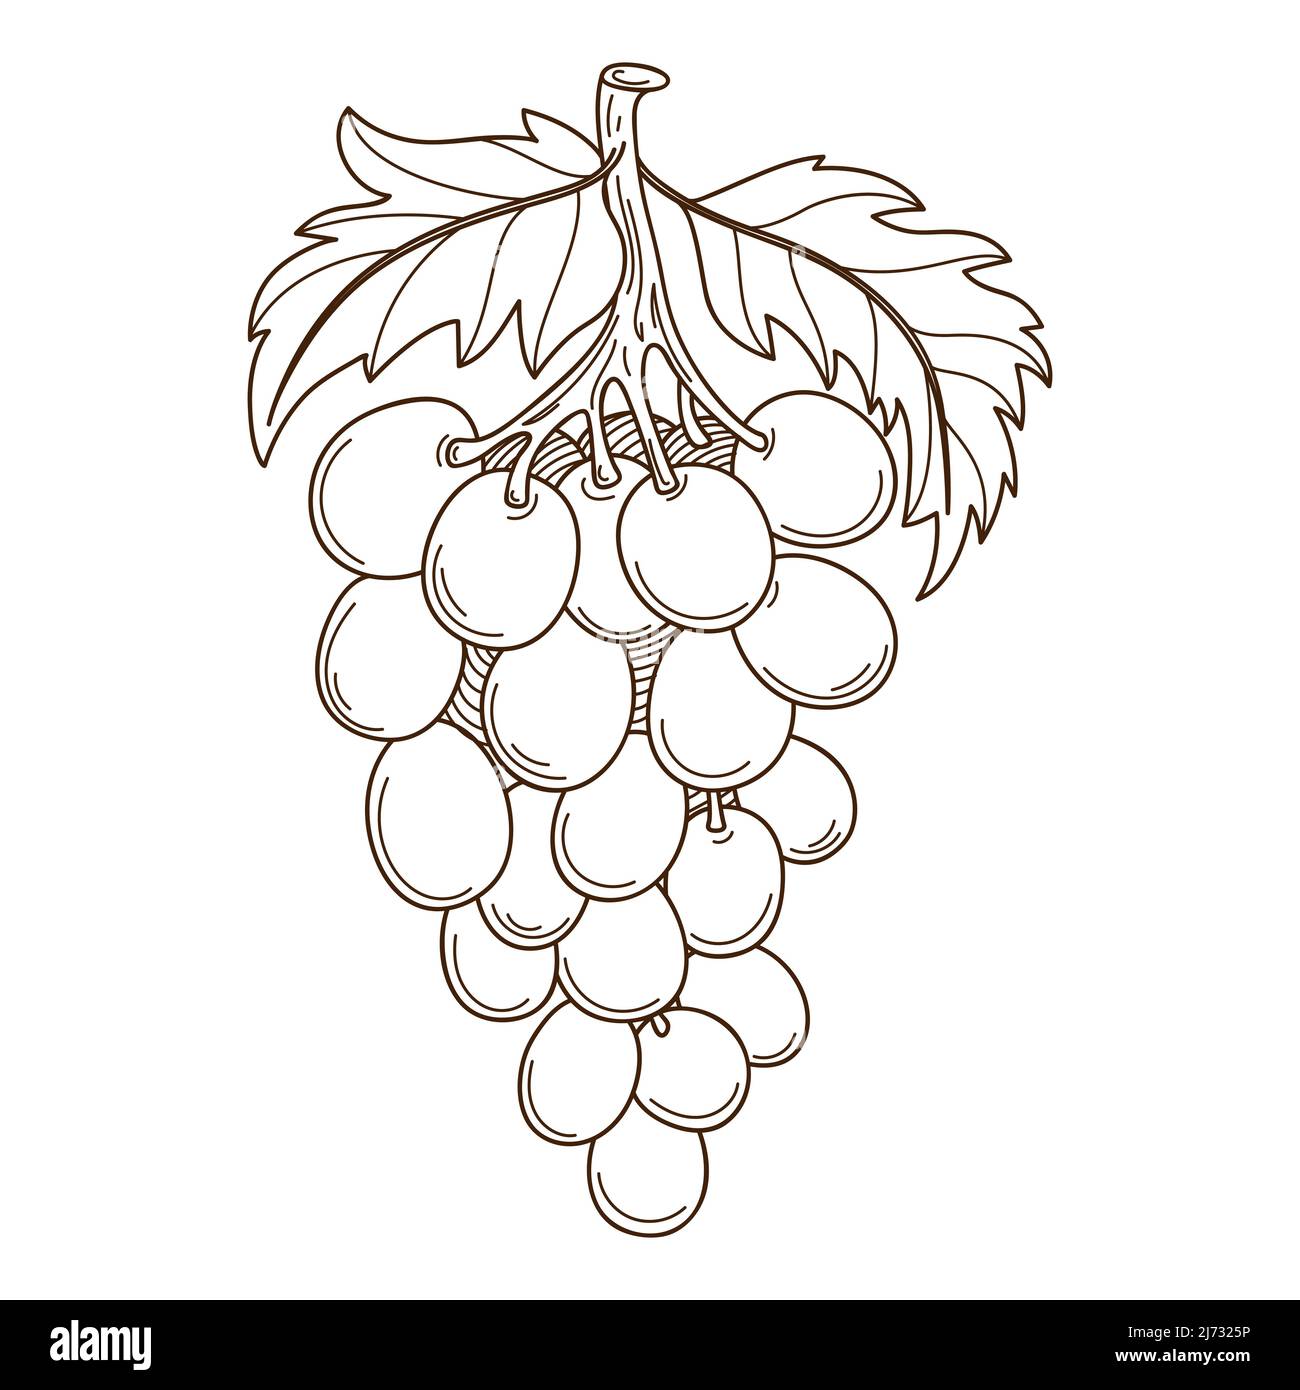 Line Drawing Grape Free PNG And Clipart Image For Free Download - Lovepik |  401097979